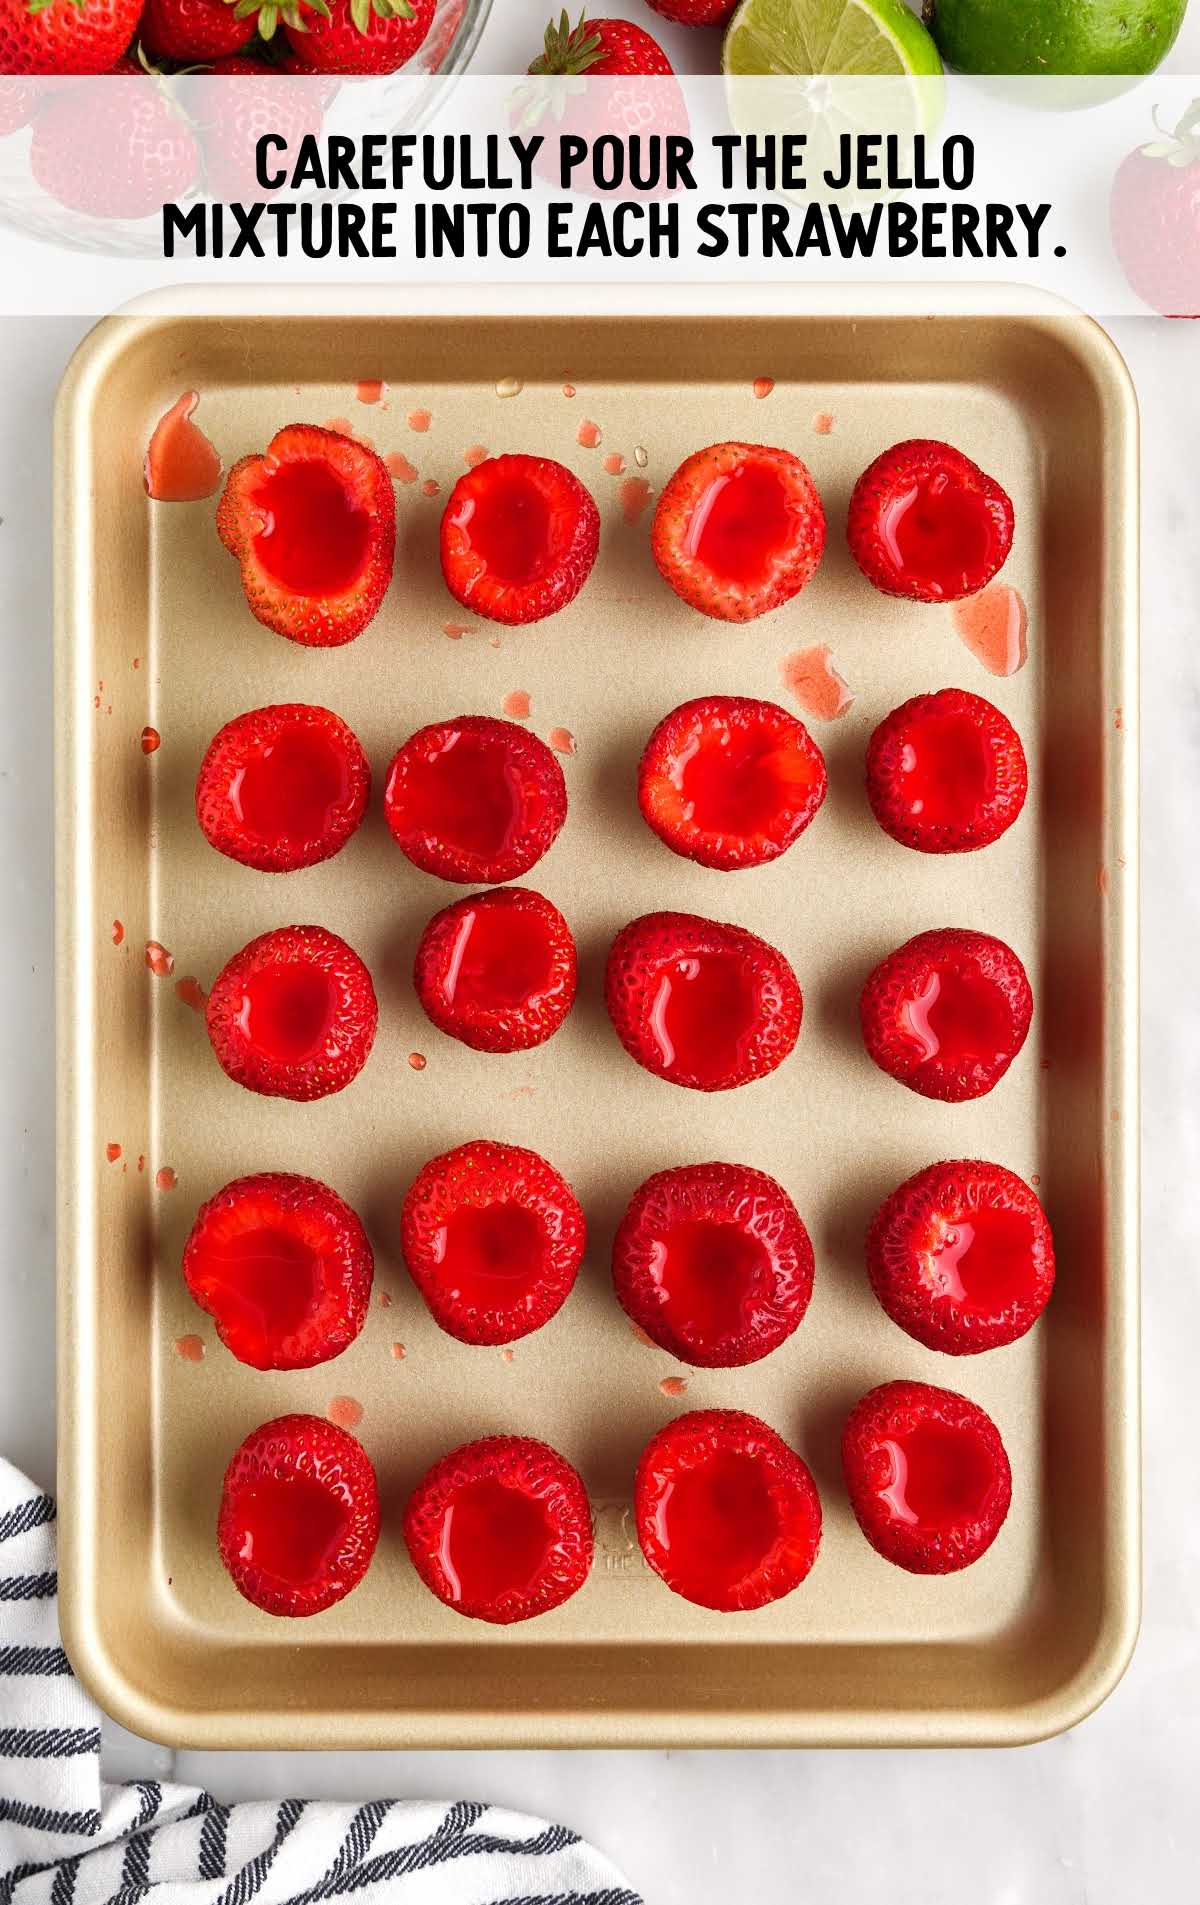 jello shot poured into each strawberry on a tray